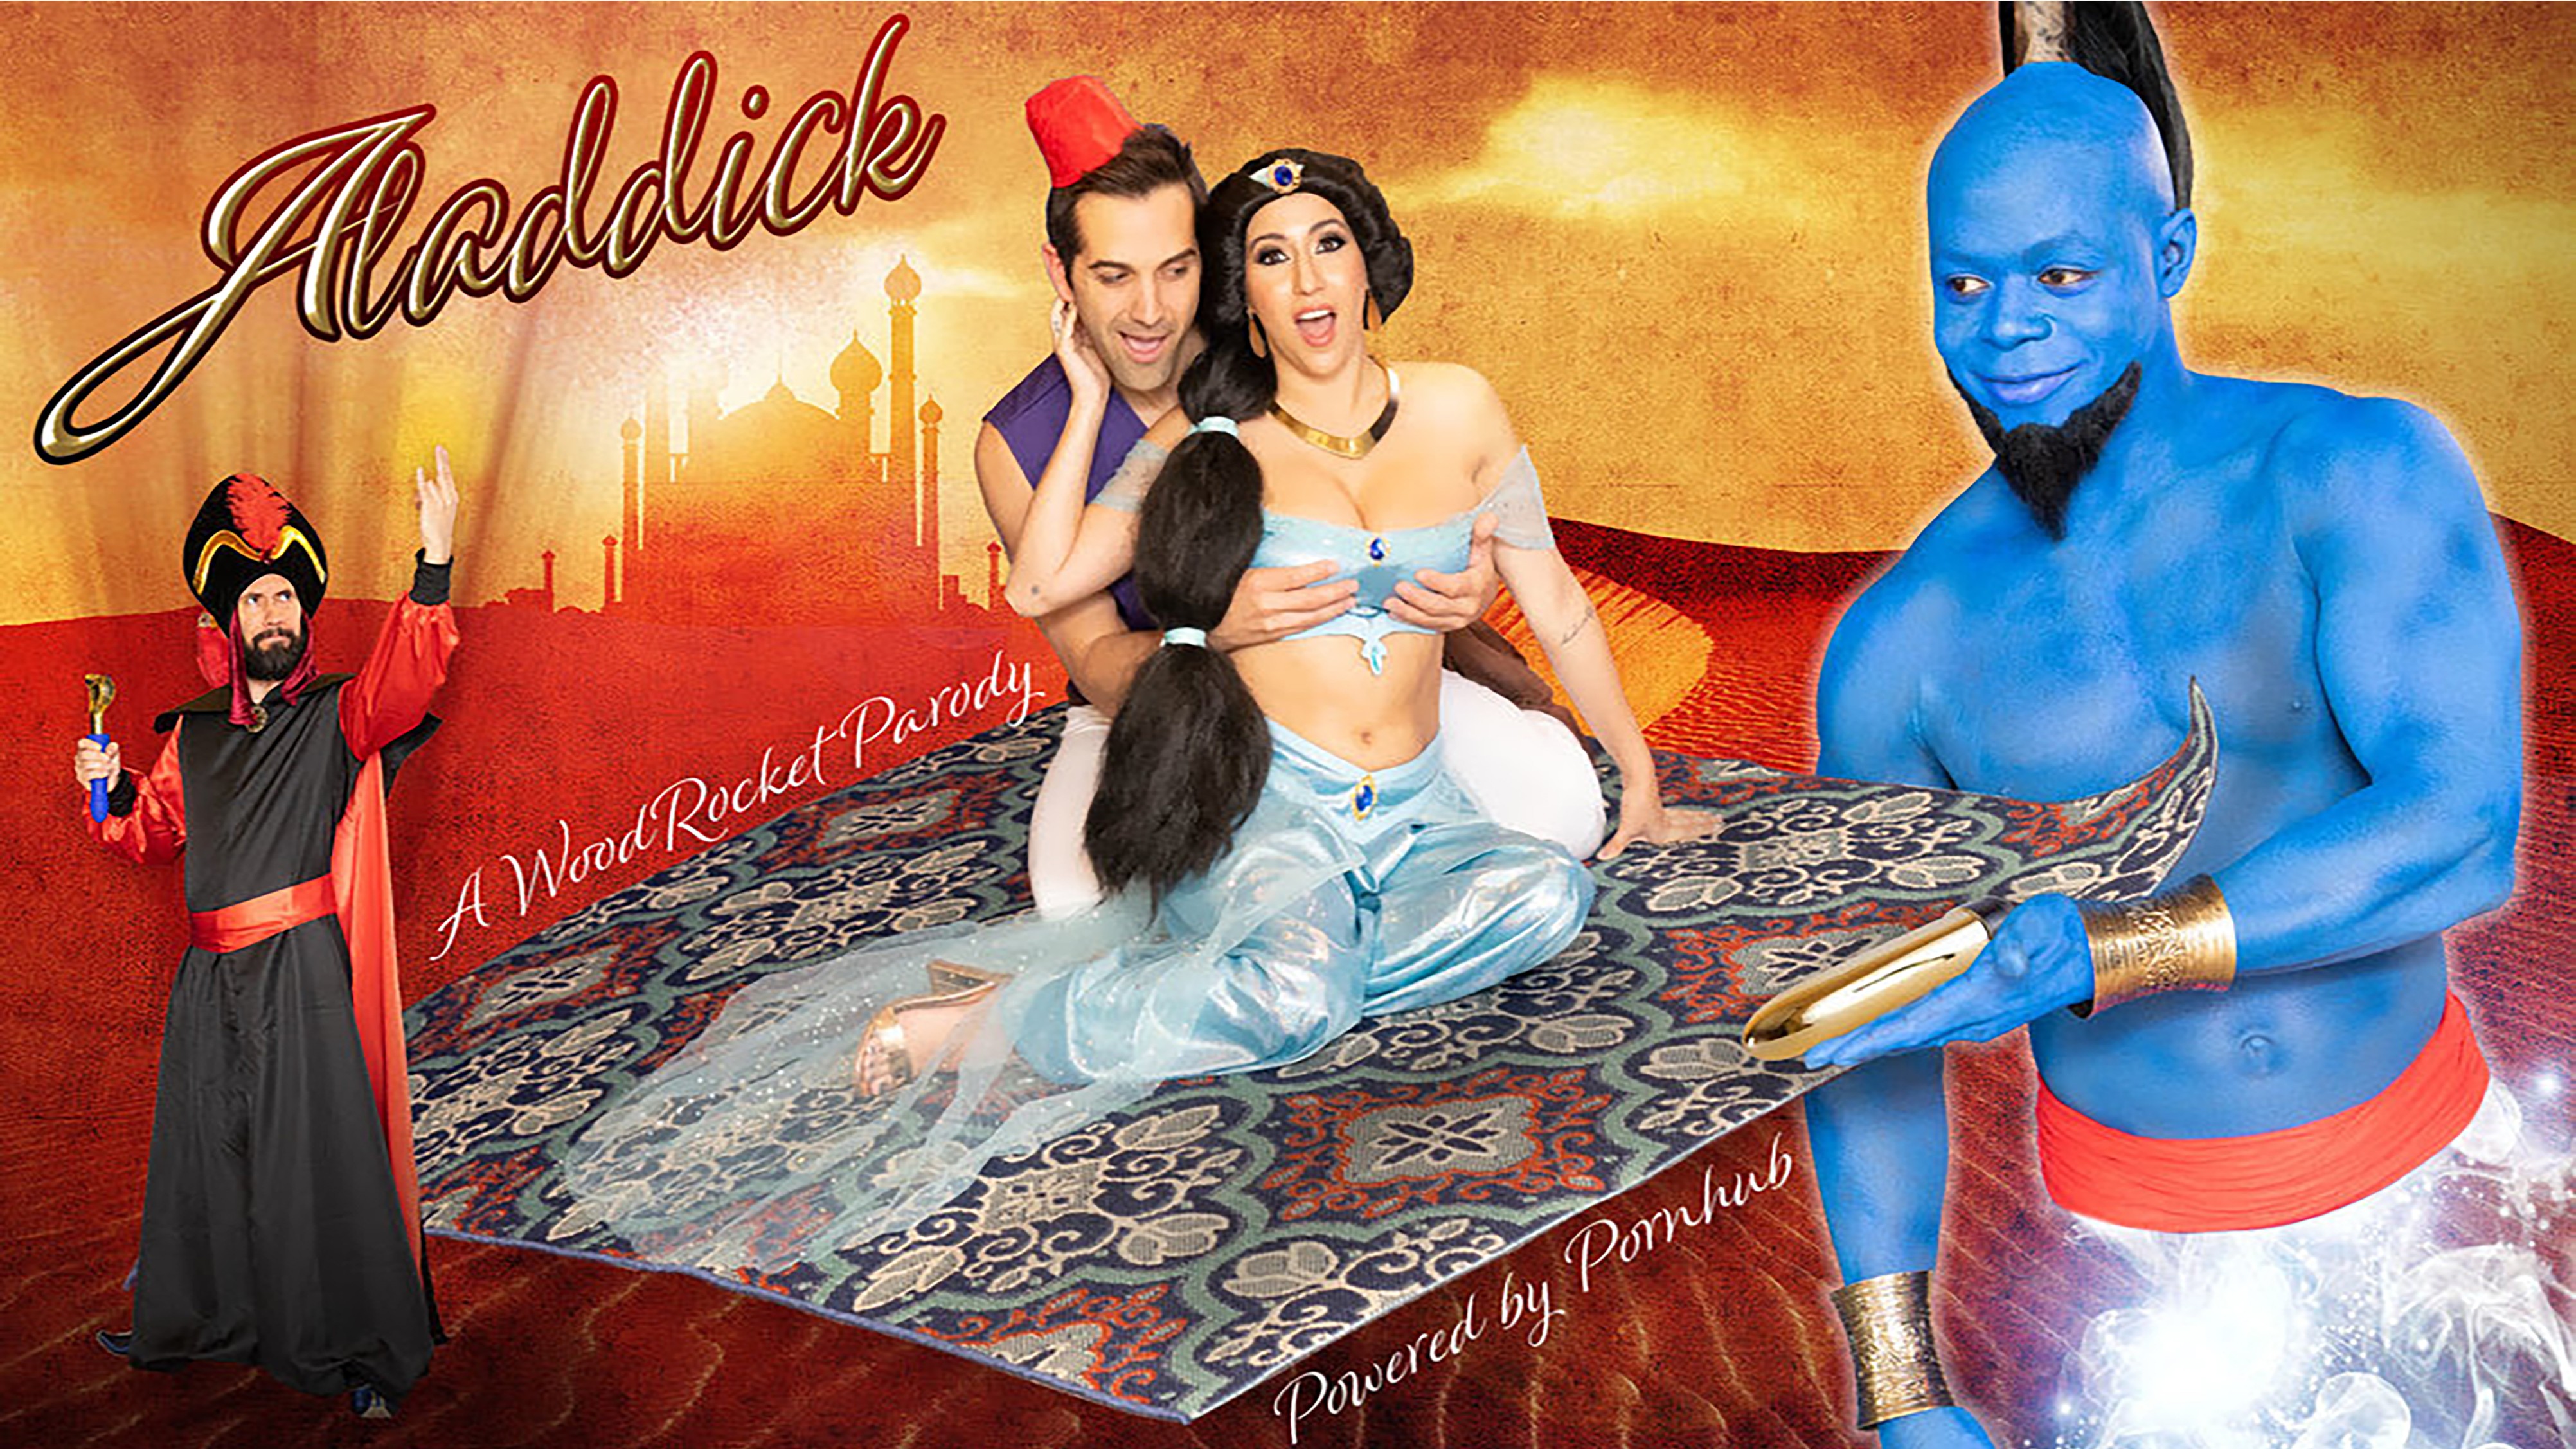 Sexy Aladdin Games - The 'Aladdin' Porn Parody Is Here and We Fixed Its Title